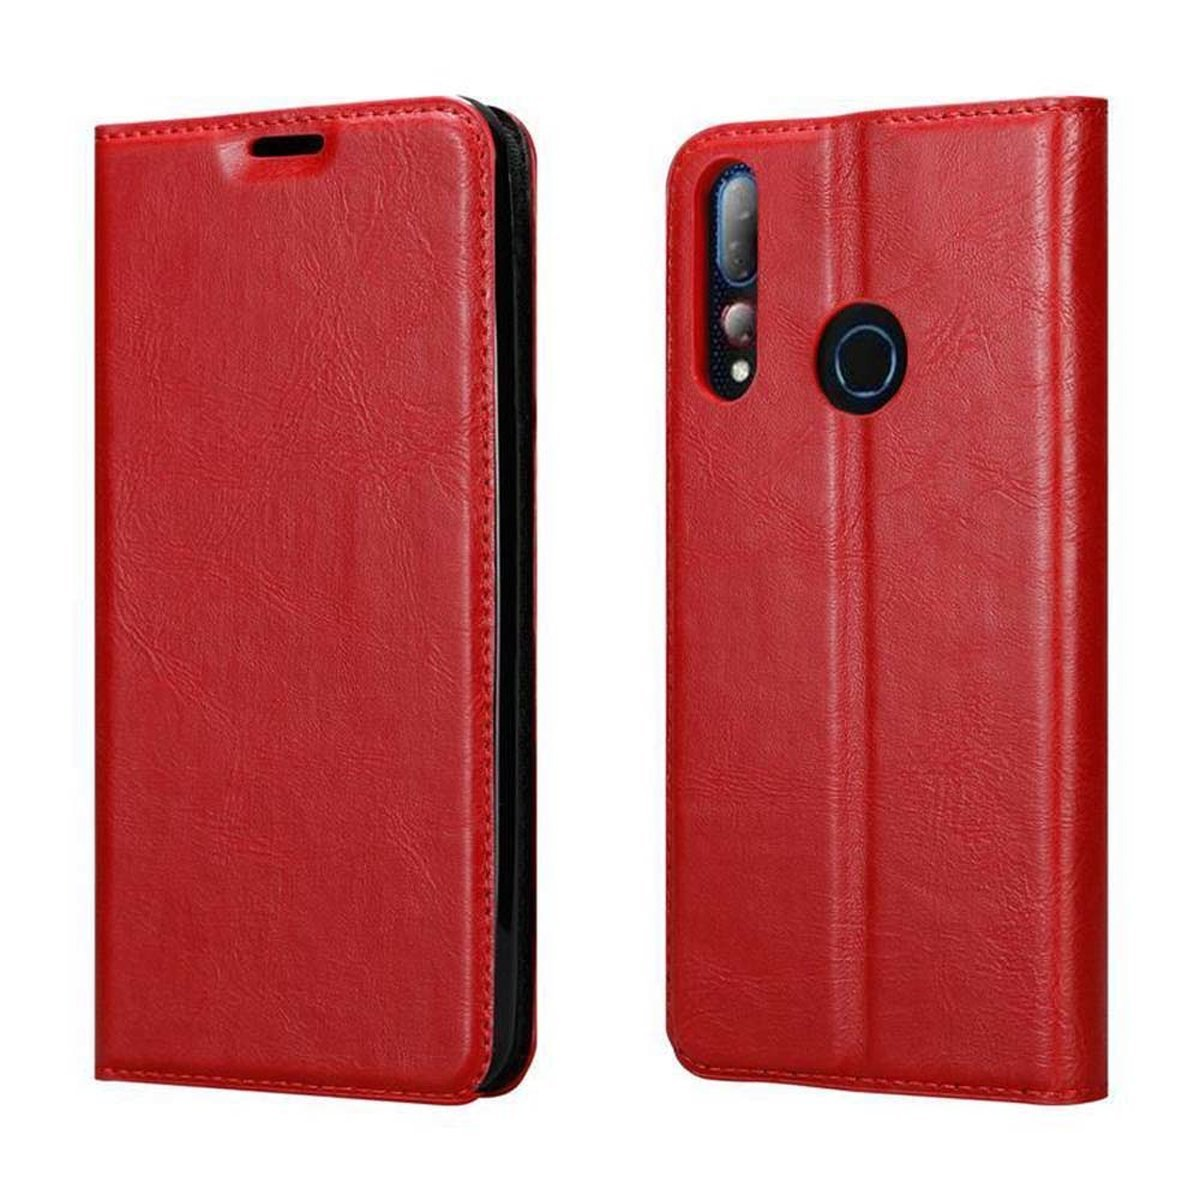 Desire PLUS, Magnet, HTC, 19 CADORABO ROT Book Invisible APFEL Hülle Bookcover,